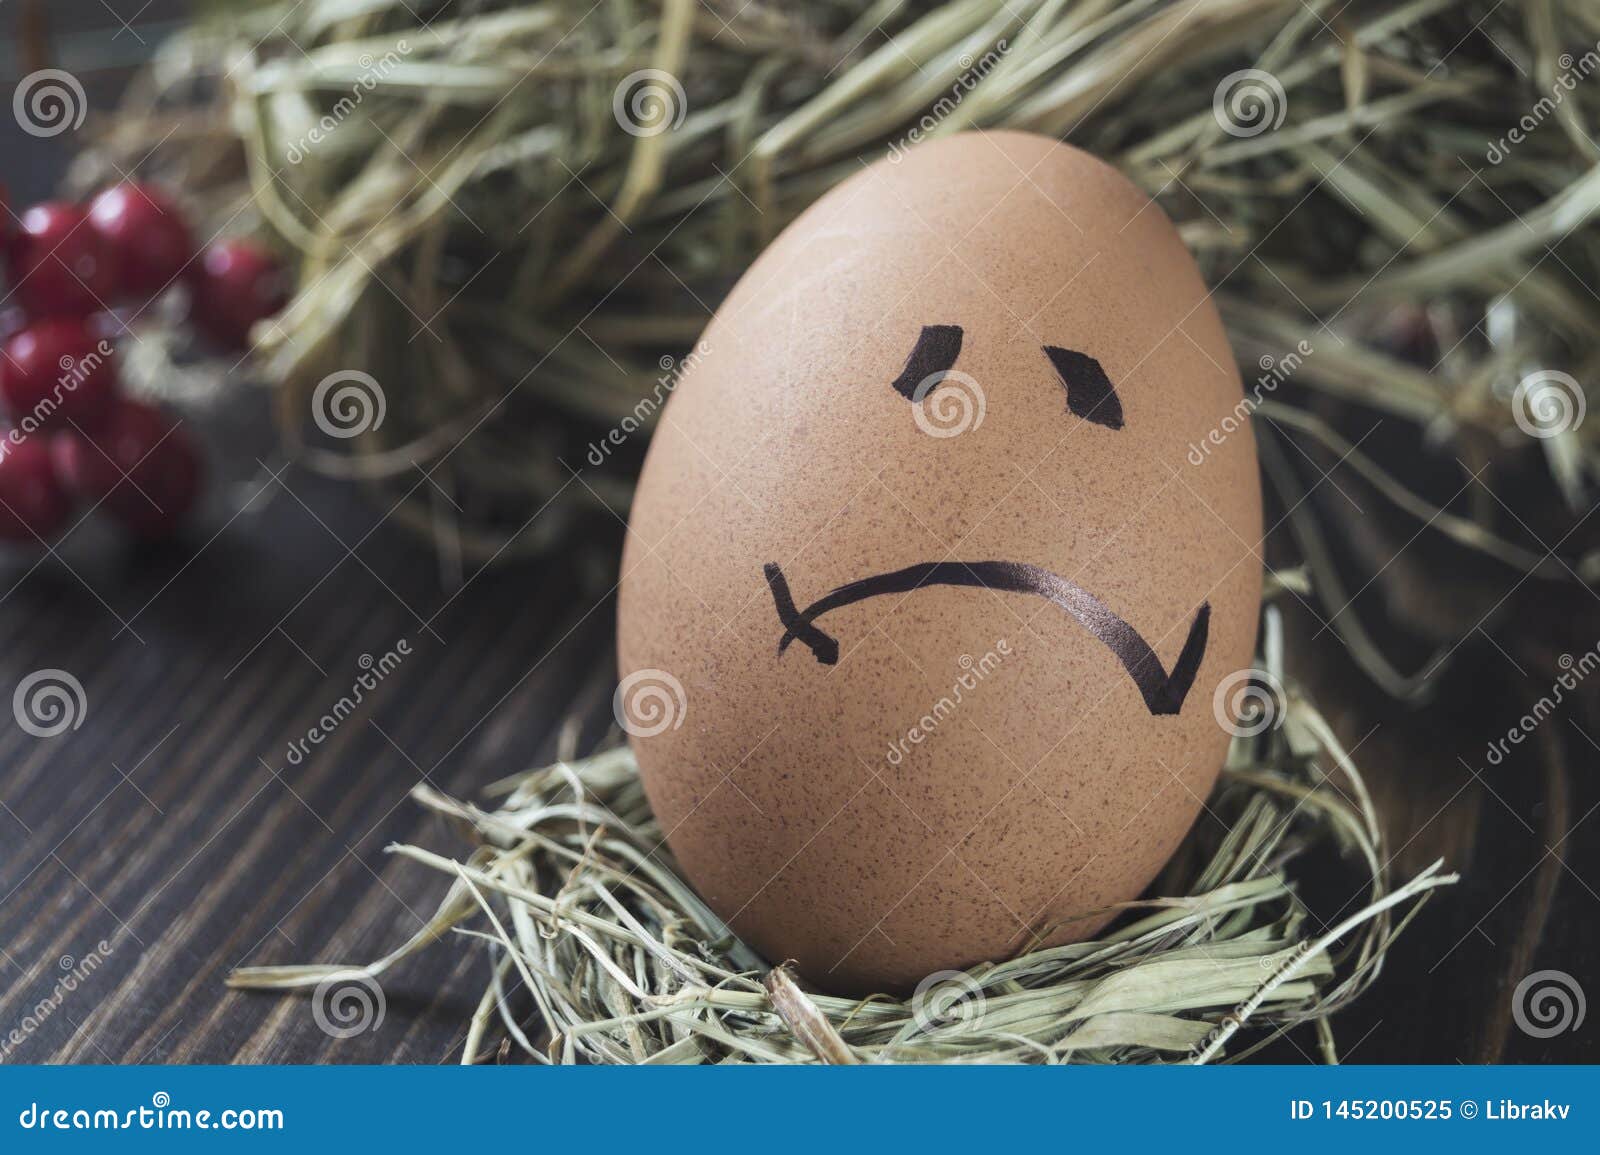 Funny Egg With Sad Face Stock Image Image Of Fresh 145200525